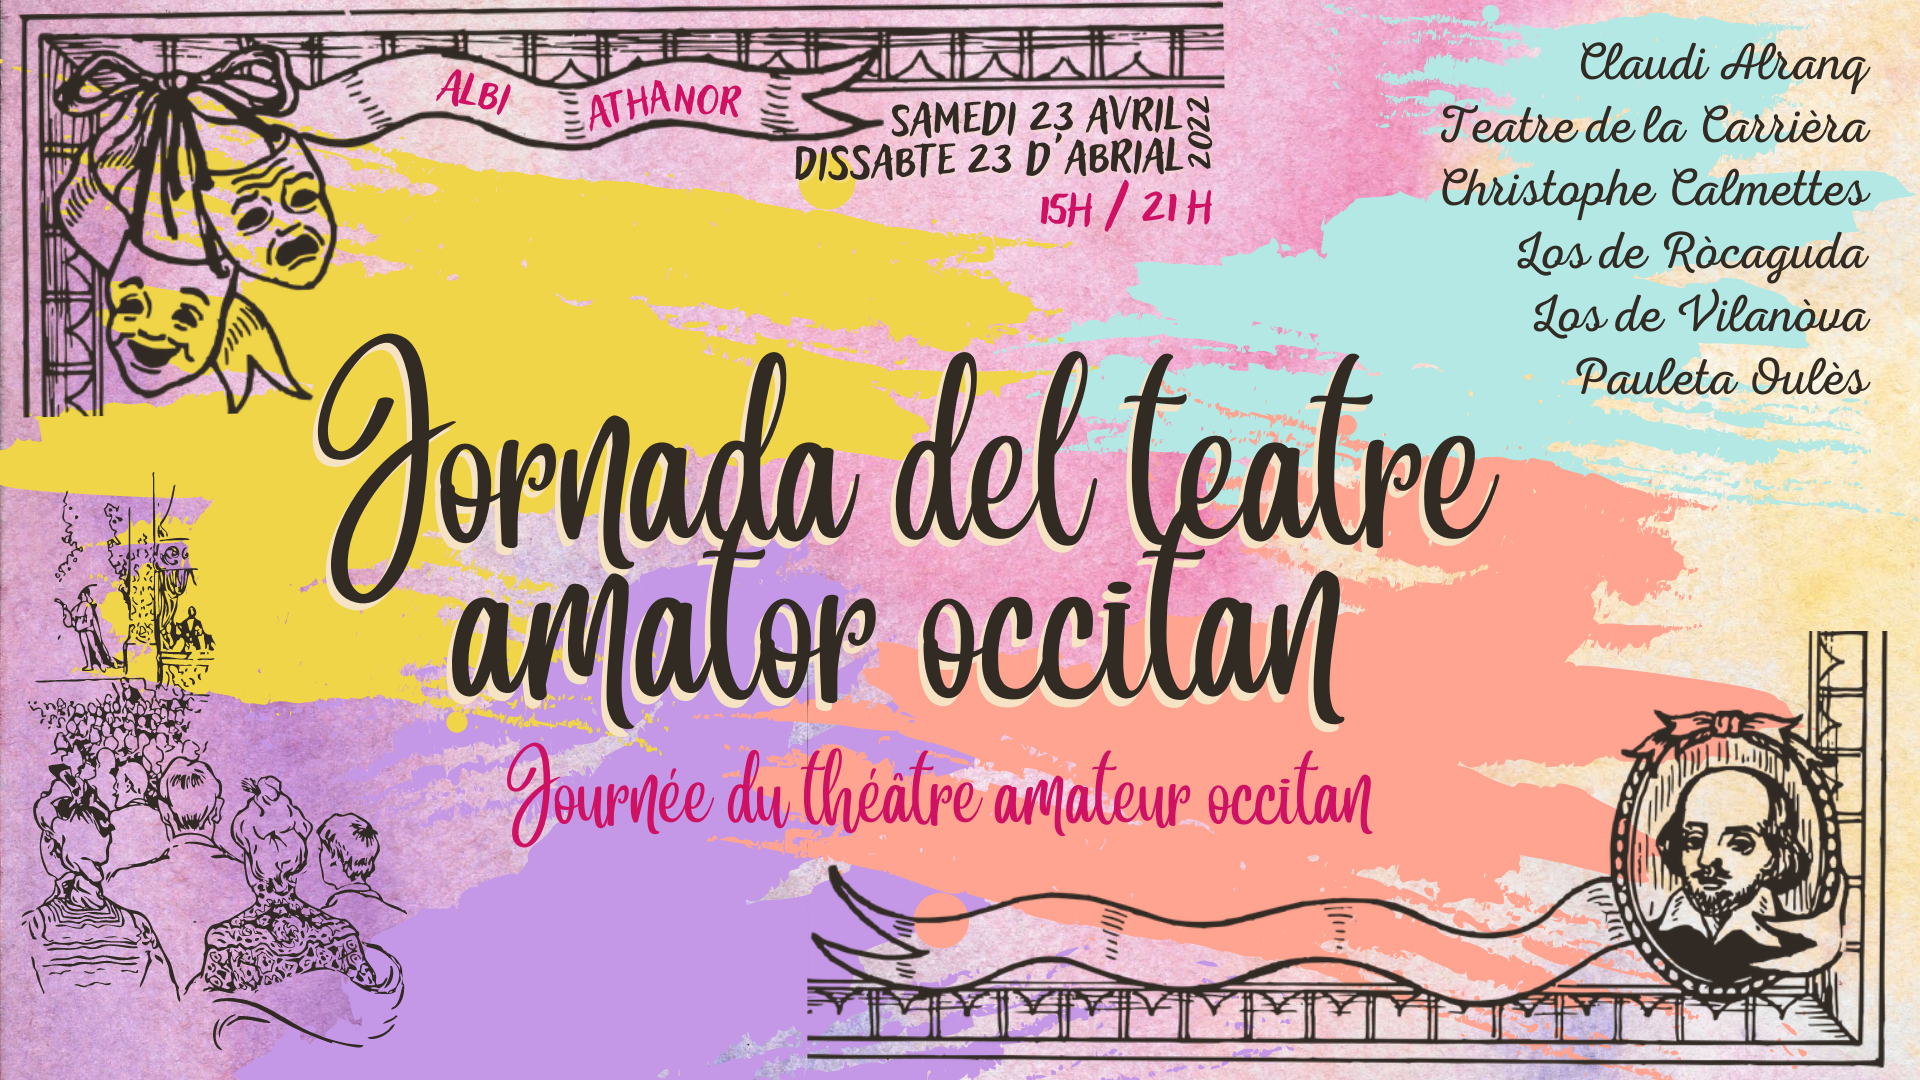 You are currently viewing Jornada del Teatre Amator Occitan + Espectacle “Molière Face Sud” à l’Athanor lo 23 d’abrial 2022 !